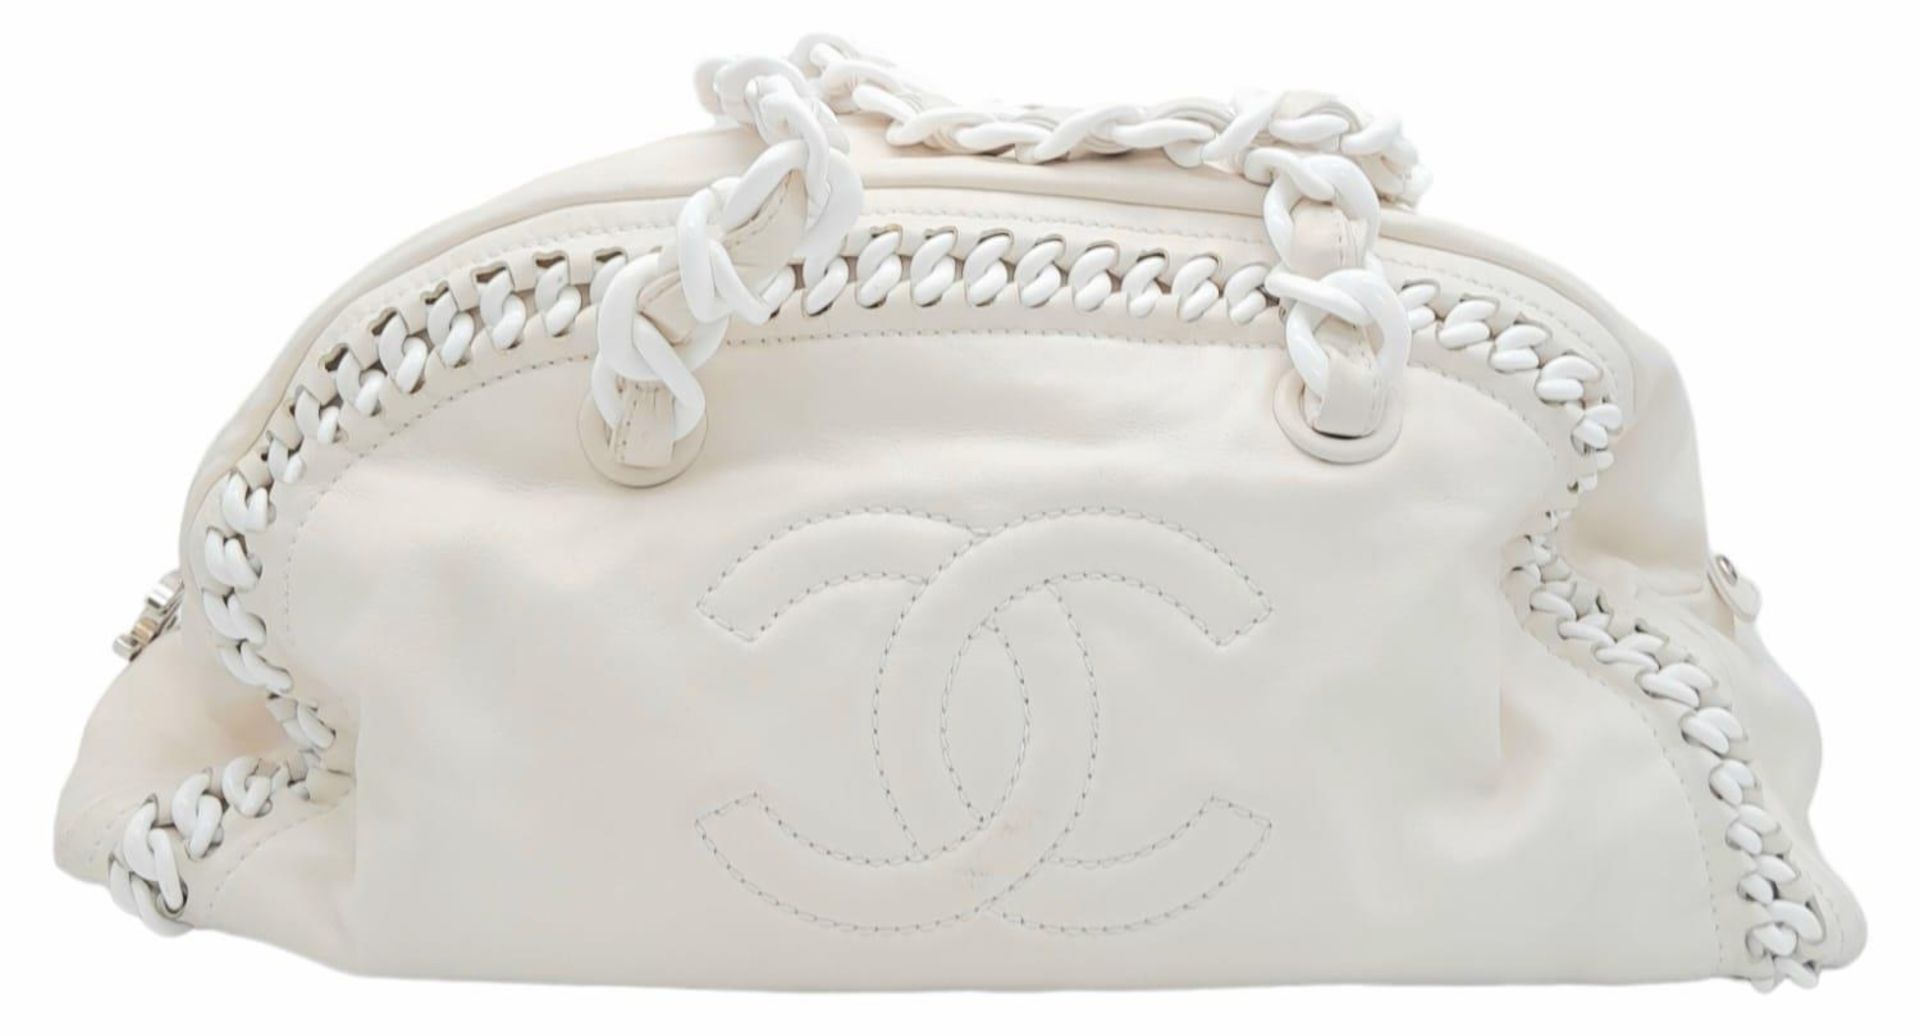 A Chanel Cream Crinkled Leather Chain Bag. Interwoven chain and leather top handles. Zip closure